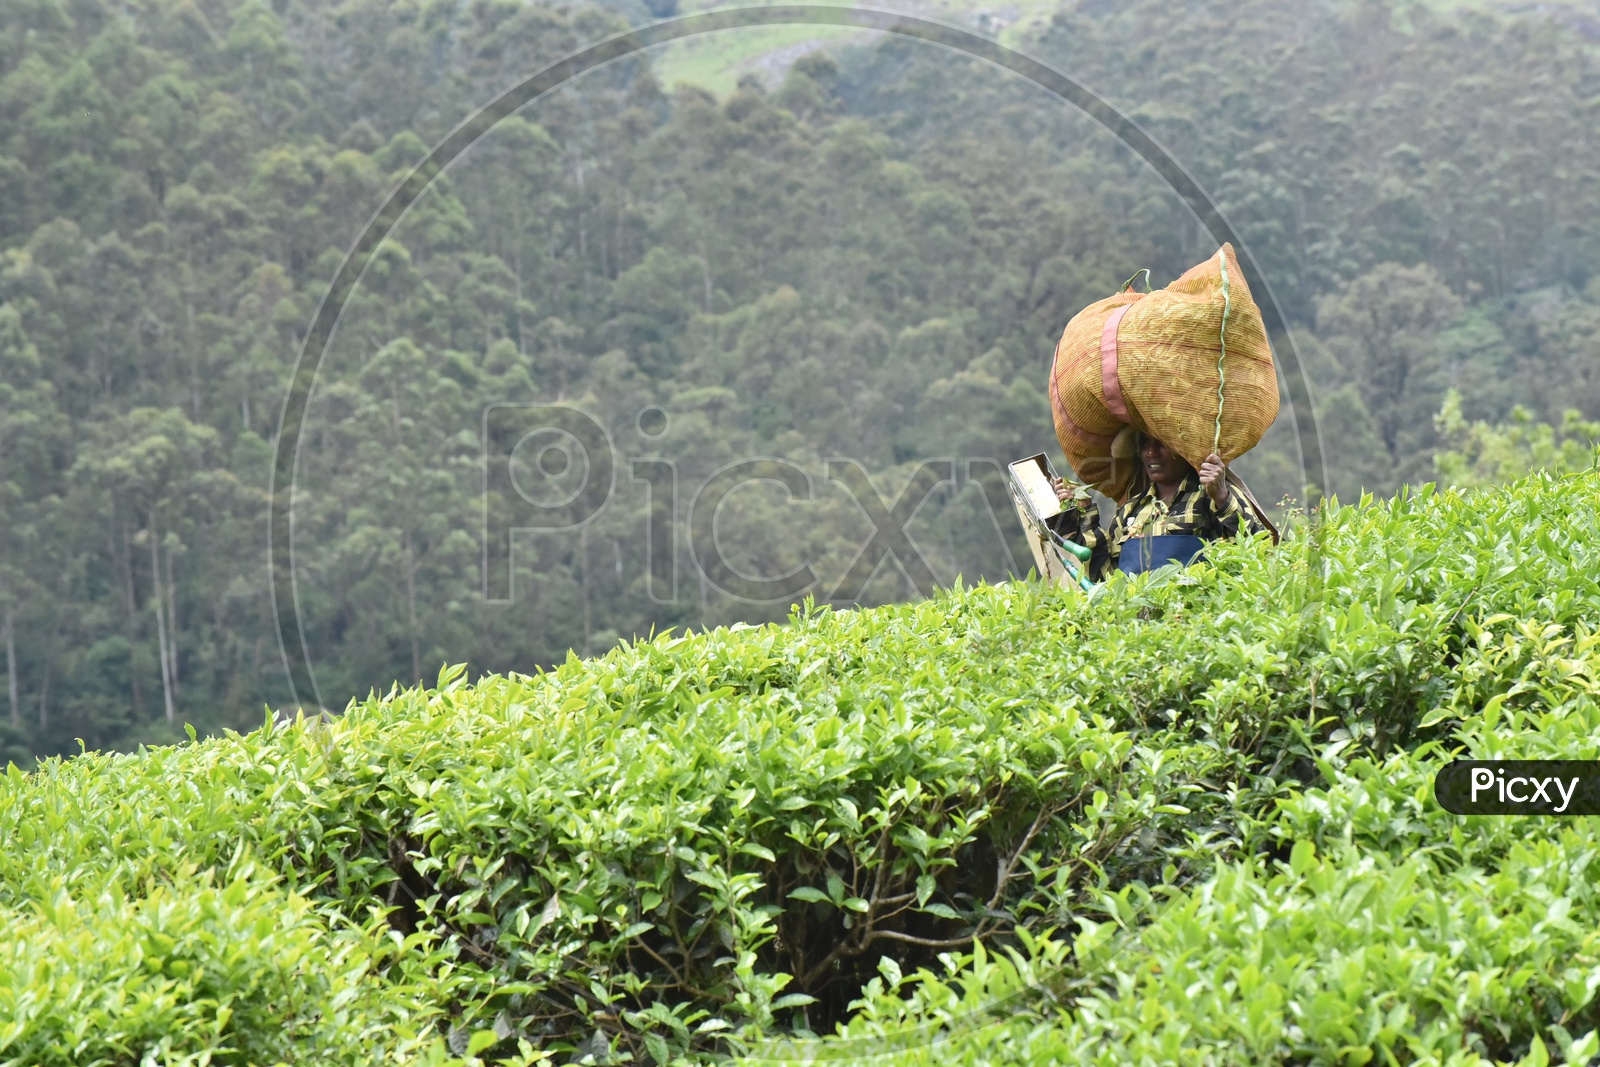 A Woman Worker Of Tea Plantation Carrying a Bag Of Freshly Harvested Tea Leaves On Her Head in Tea Plantation Of Munnar